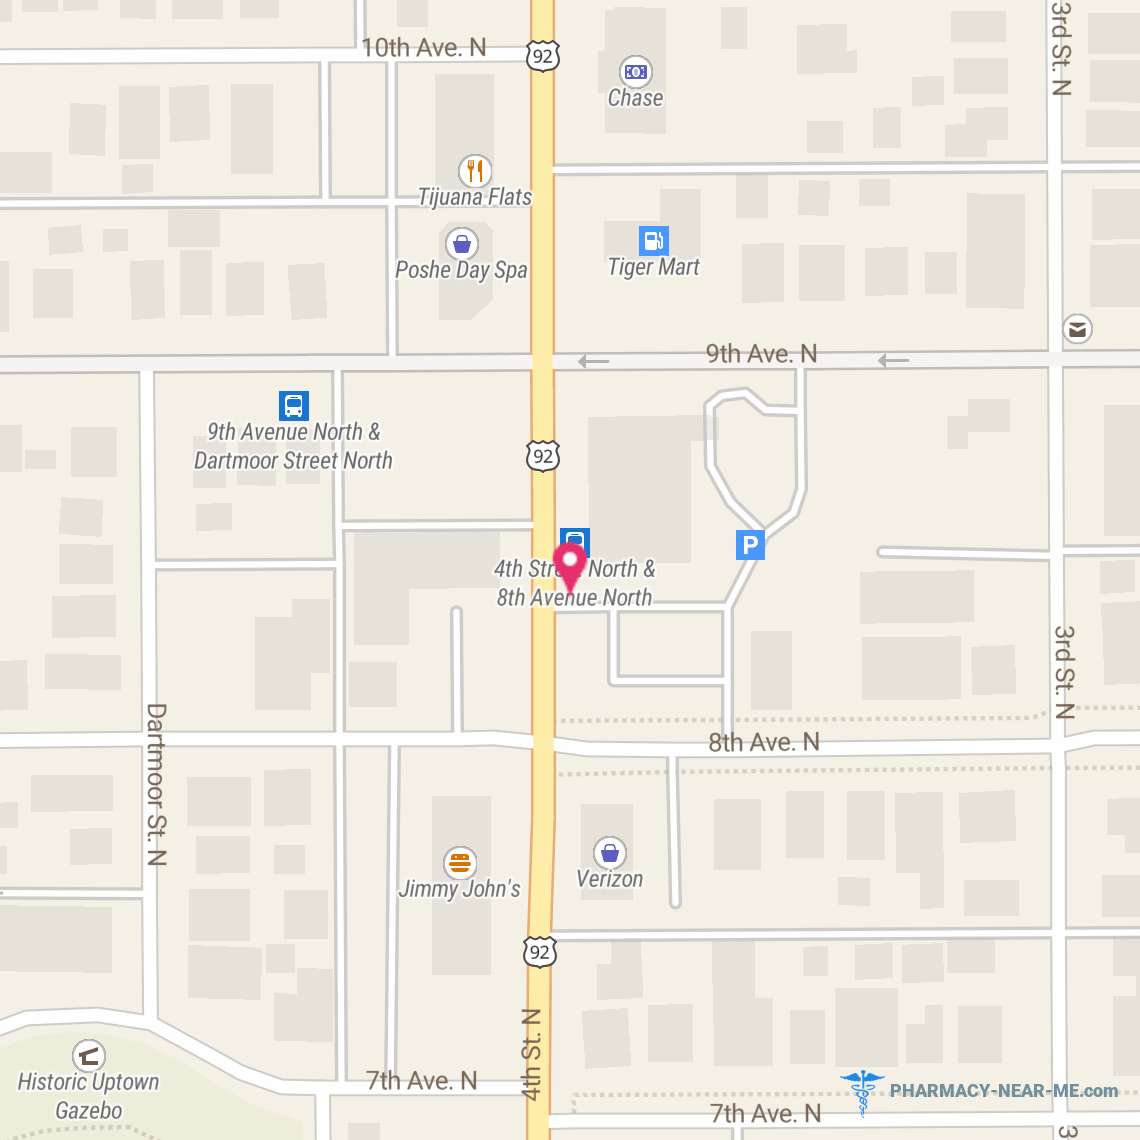 CVS PHARMACY 02759 - Pharmacy Hours, Phone, Reviews & Information: 845 4th St N, St. Petersburg, Florida 33701, United States